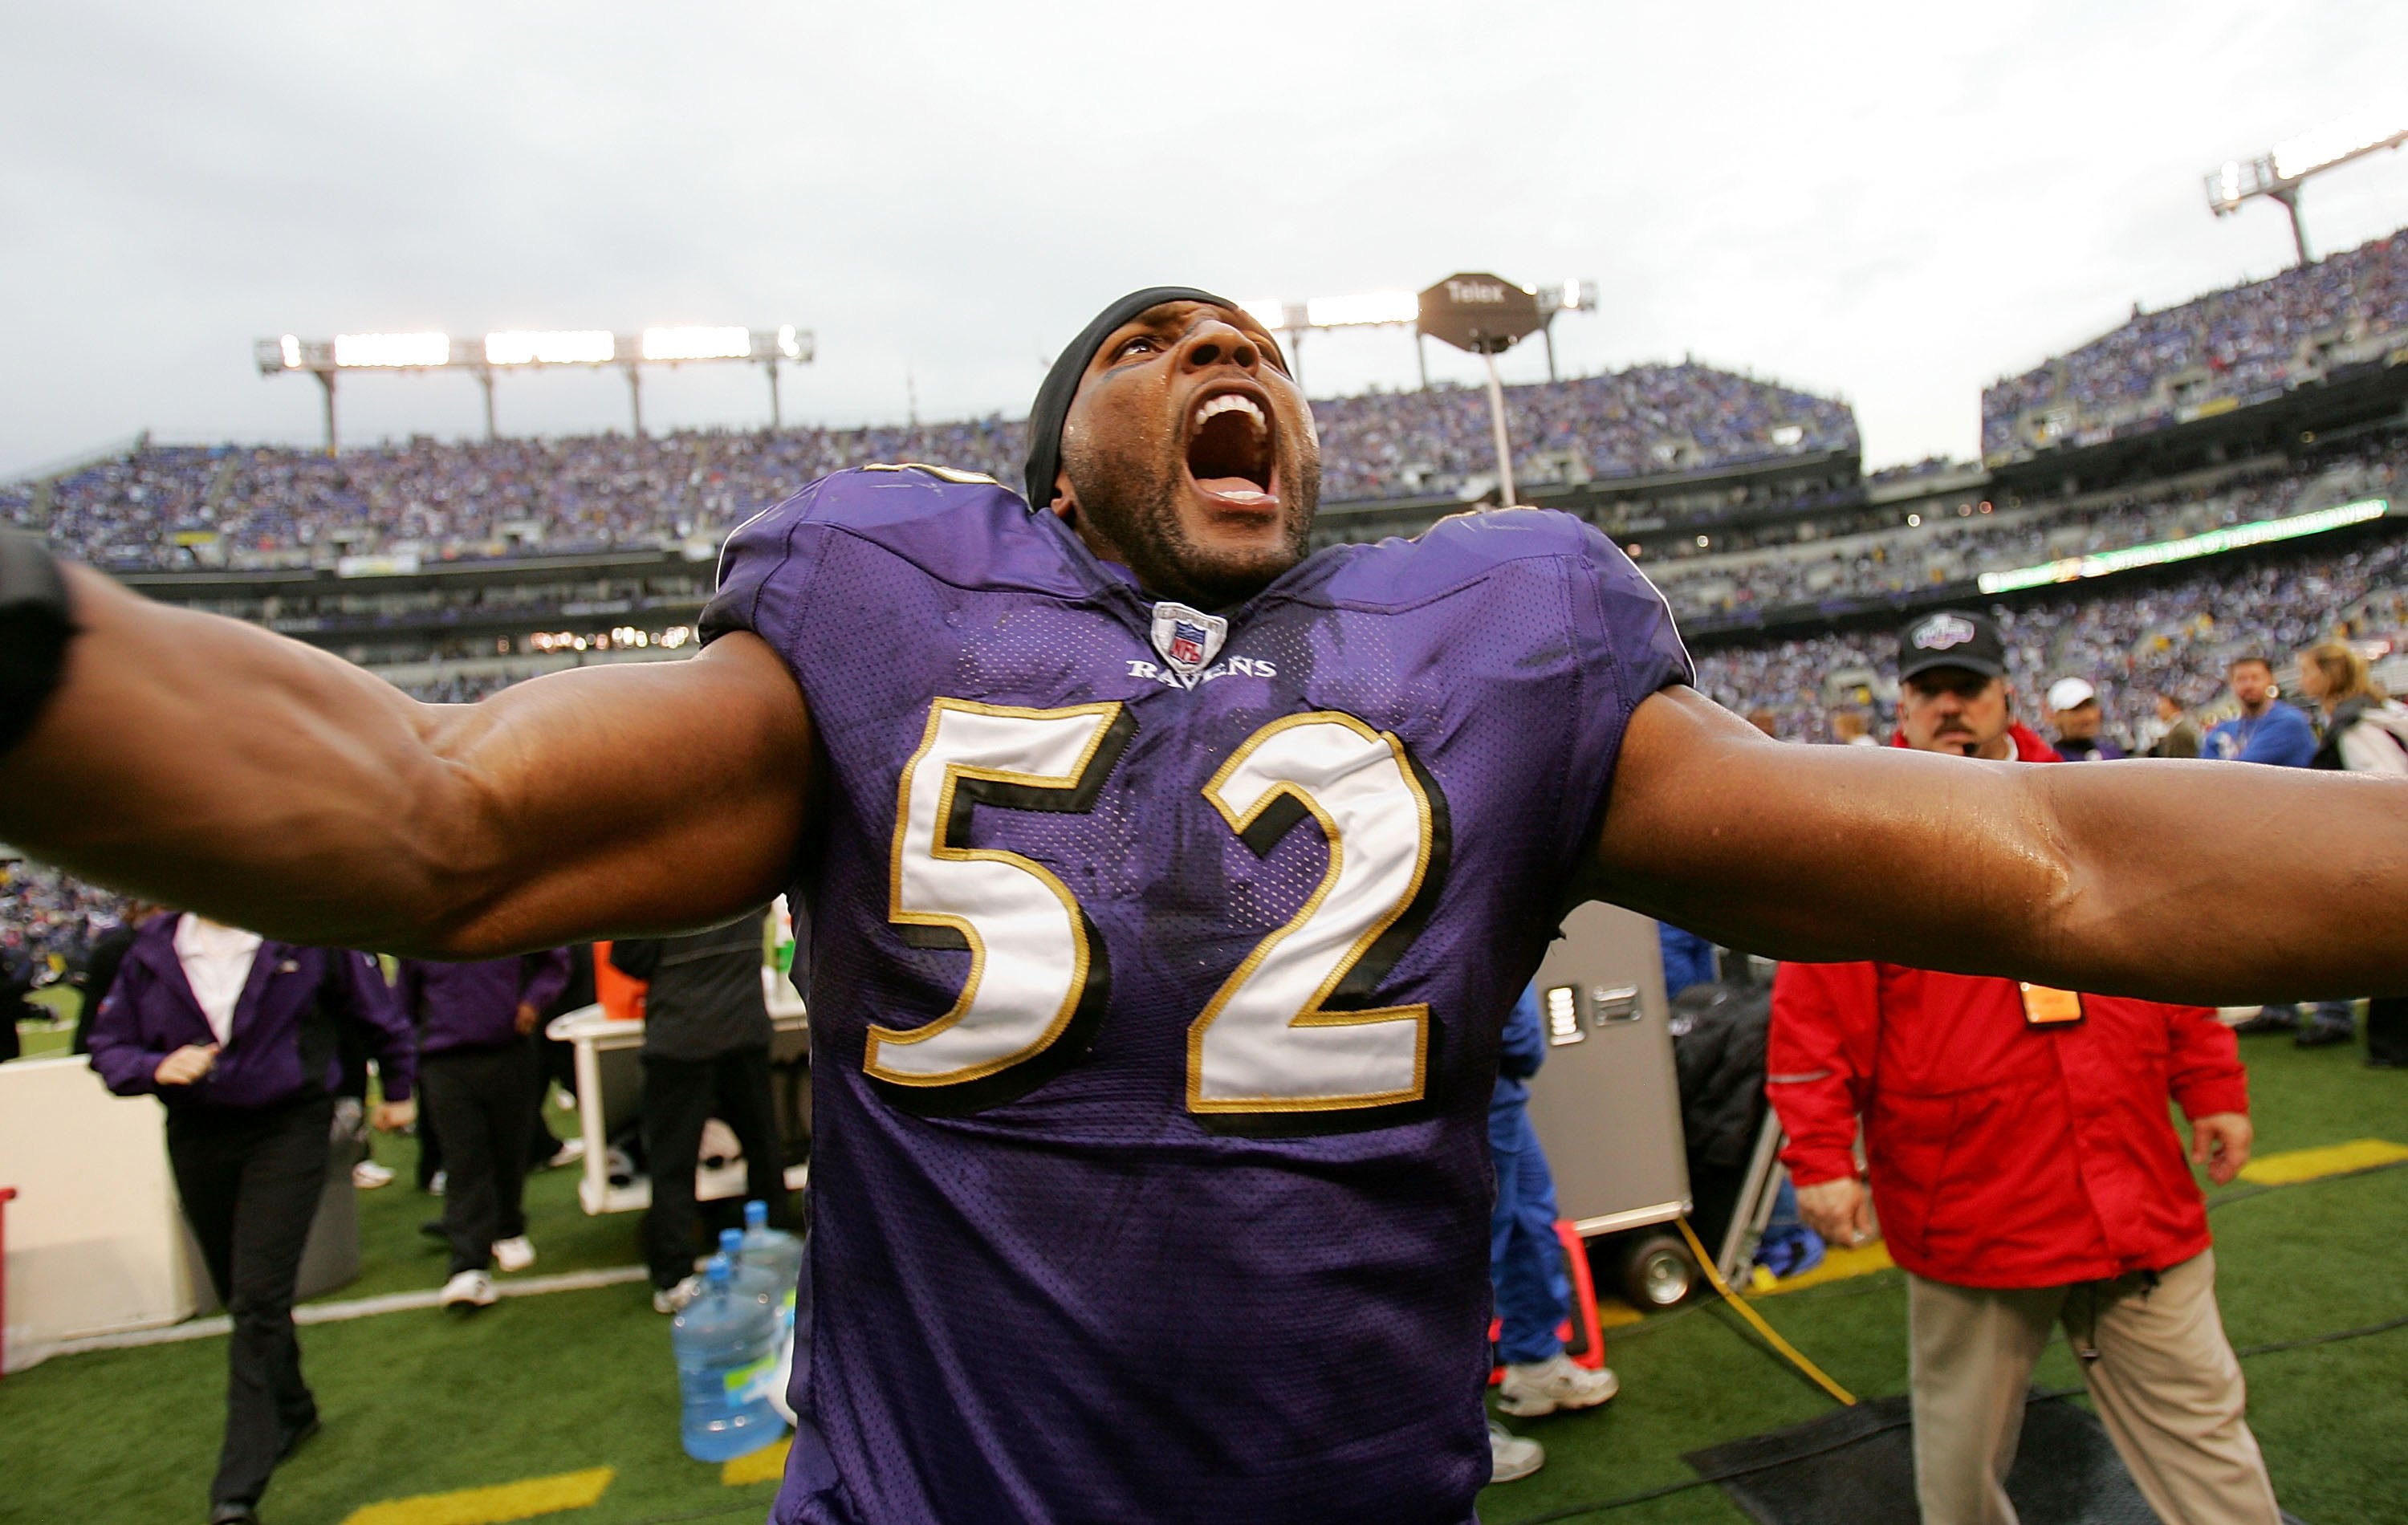 Baltimore Ravens' Ray Lewis (52) is shown during a preseason NFL